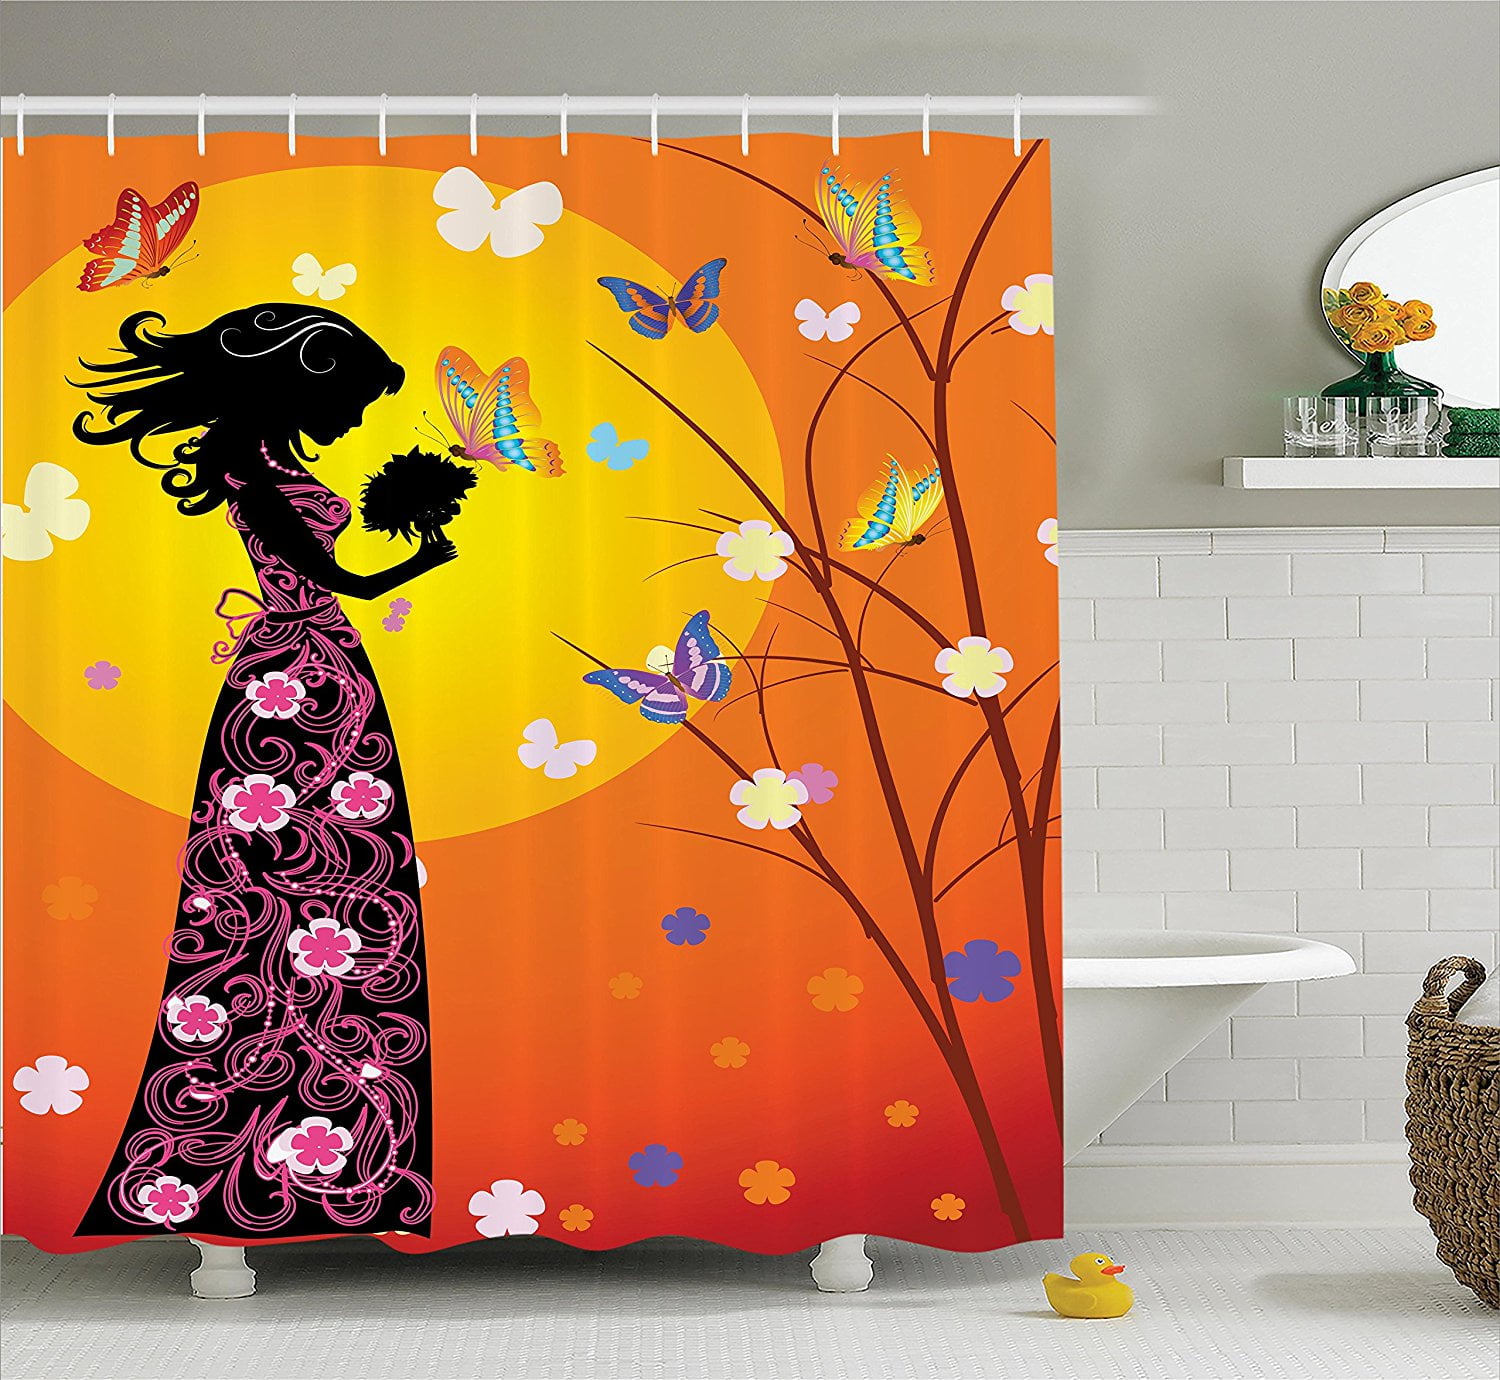 Details about   Butterfly Shower Curtain Fantasy Vibrant Color Print for Bathroom 